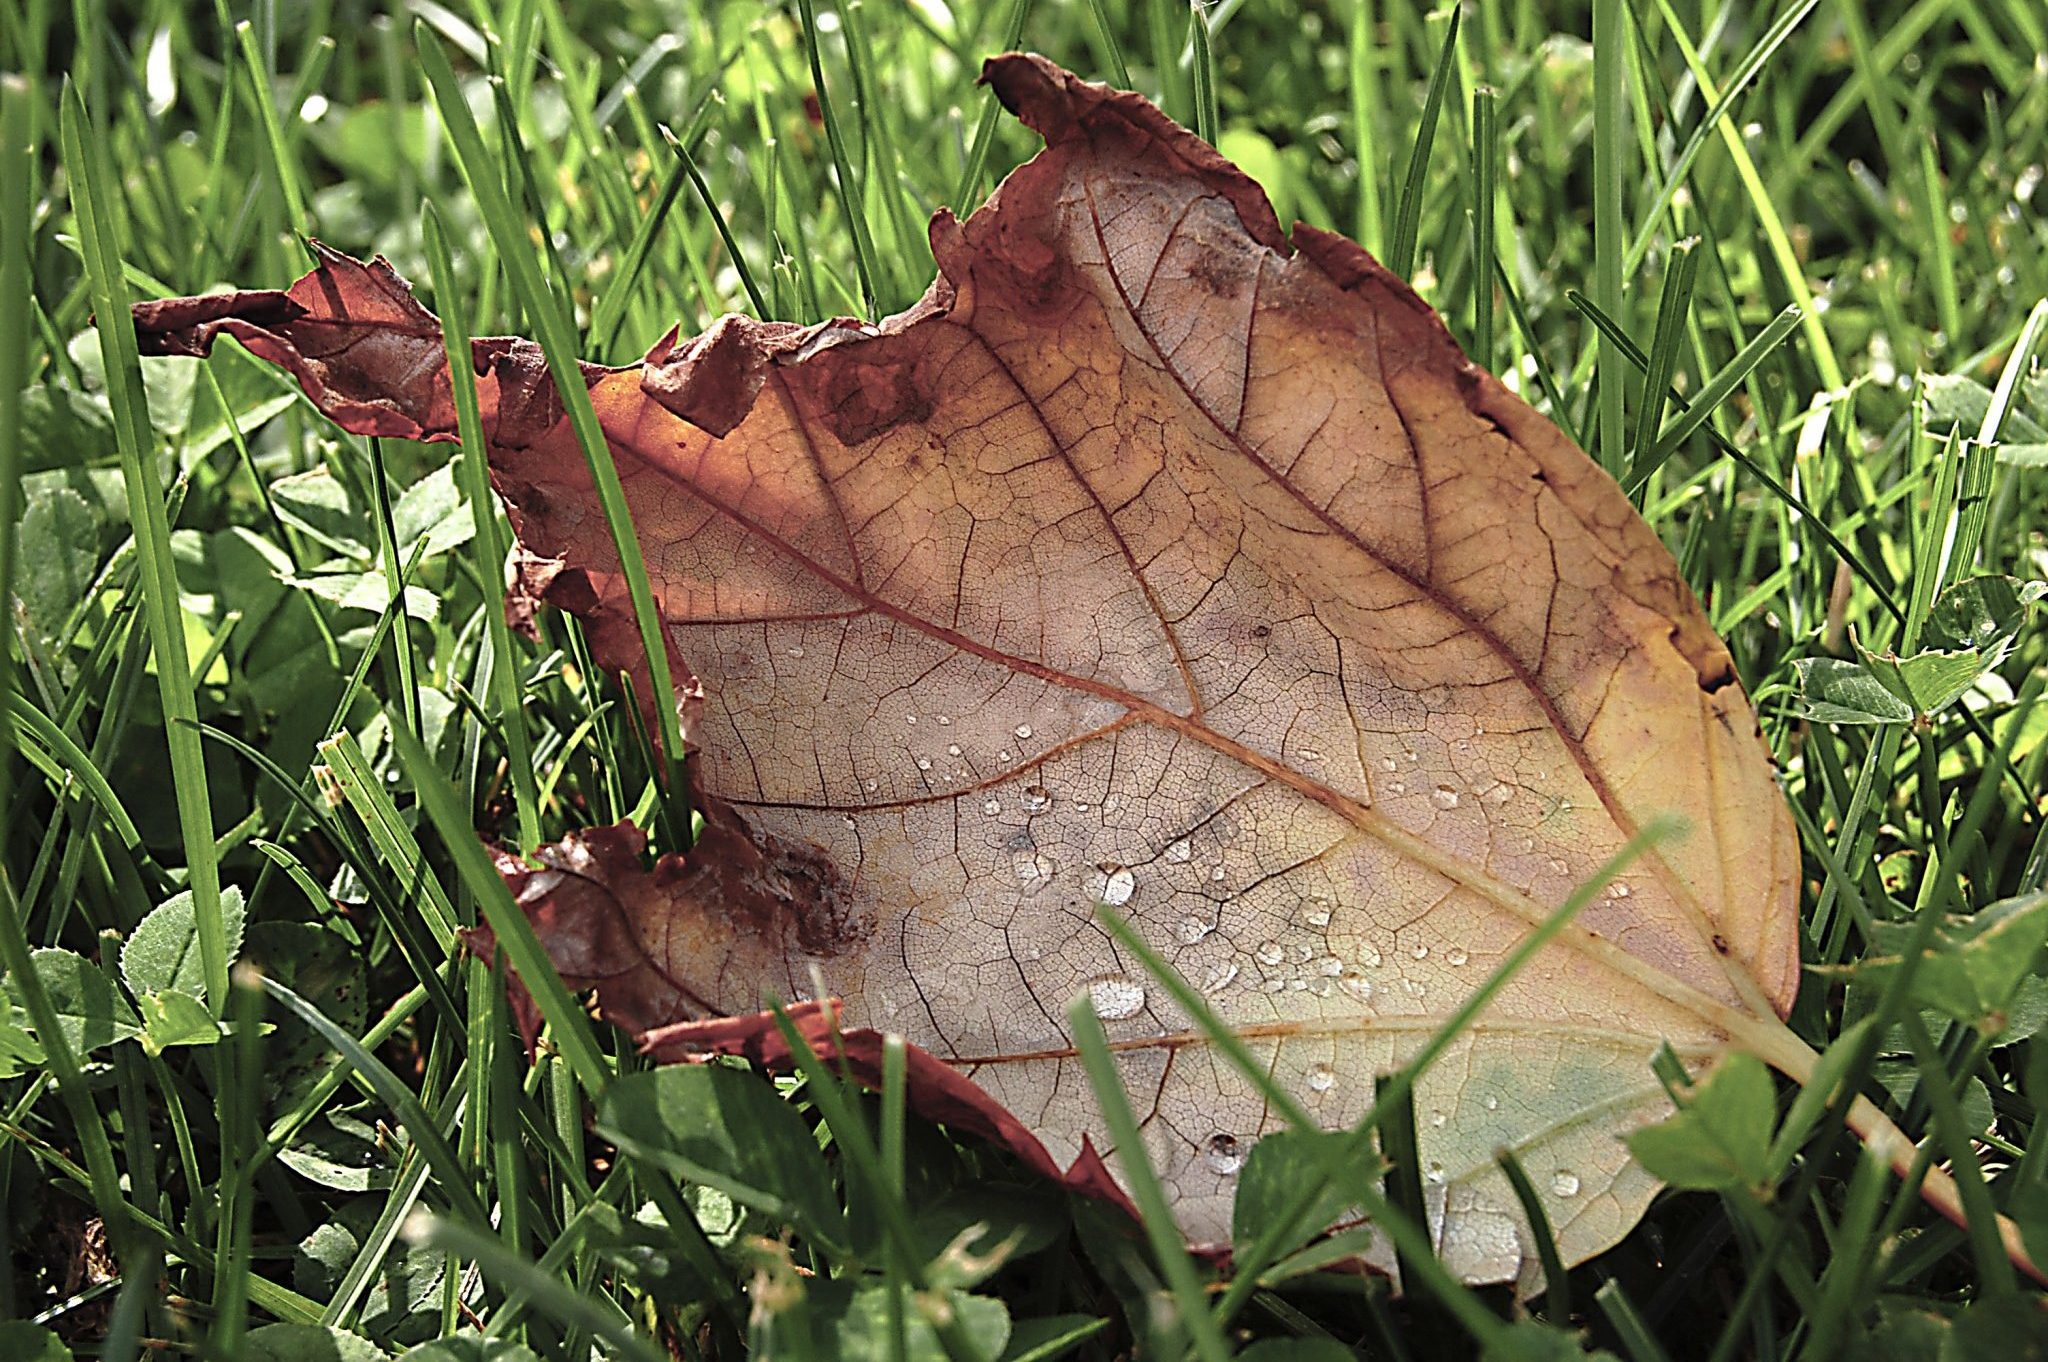 backlit oak leaf, pale red and yellow, on green grass